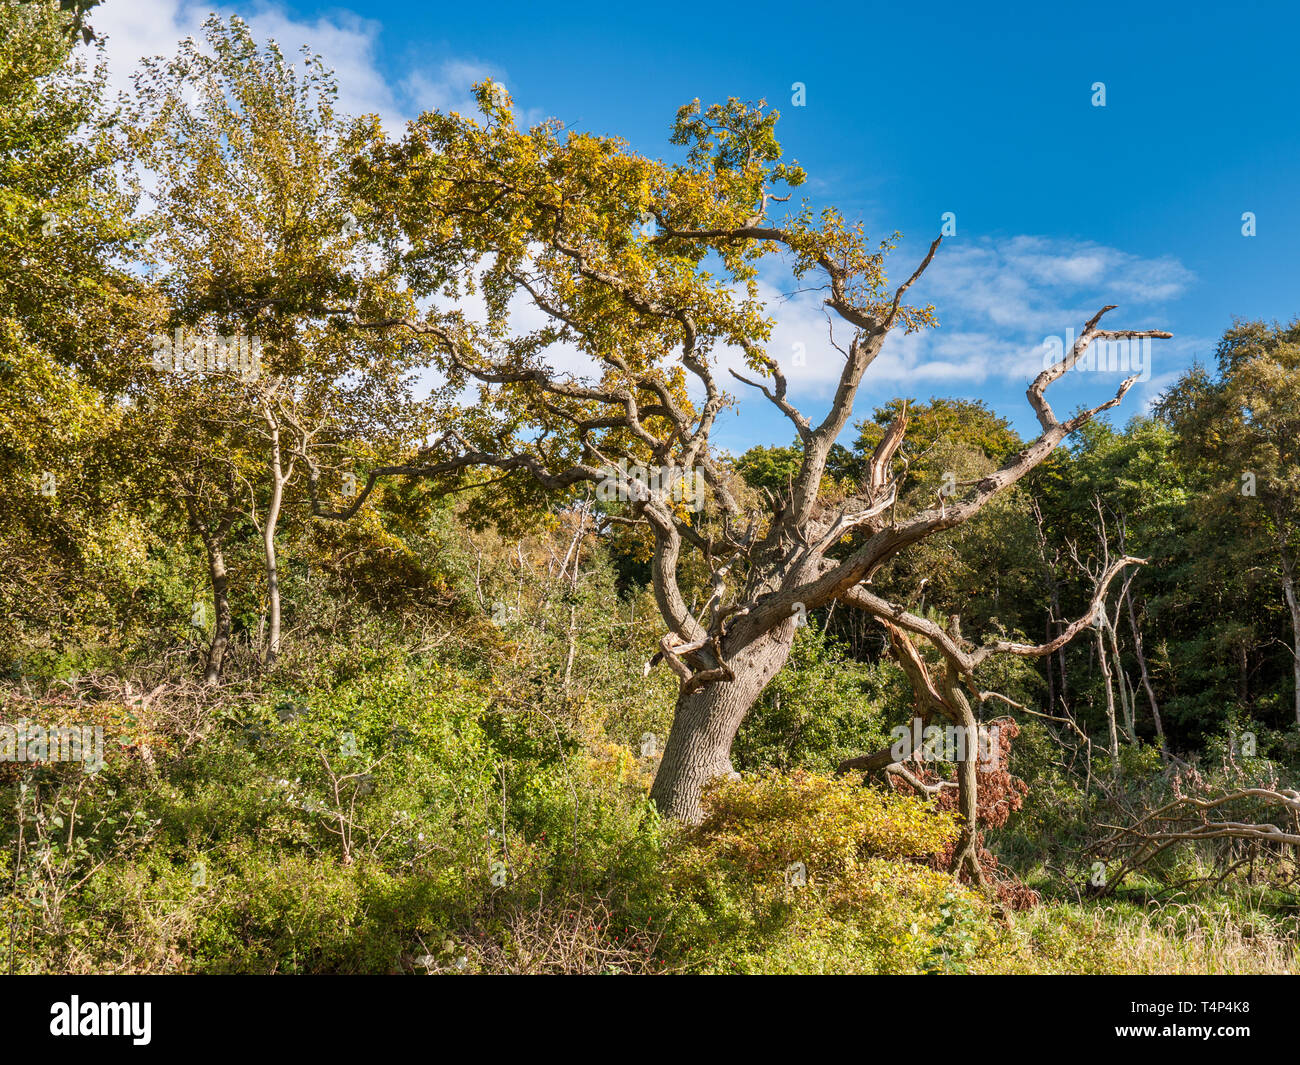 Old tree in the forest near the Baltic Sea on the island Langeland, Denmark Stock Photo